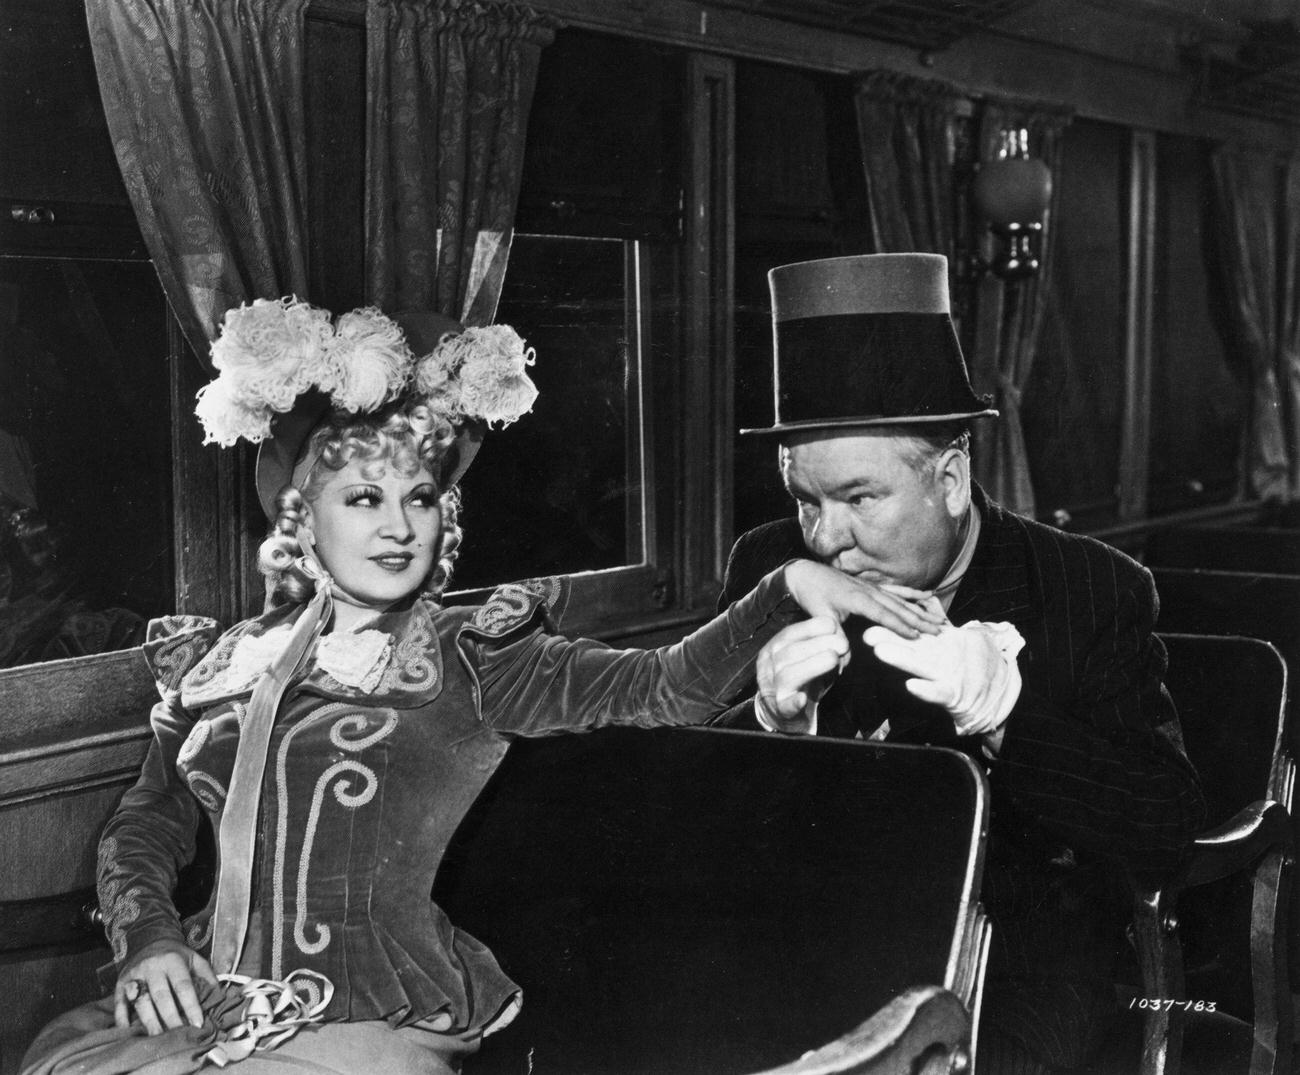 W C Fields kisses the hand of American writer, actor and comedian Mae West (1893 - 1980) while sitting aboard a train